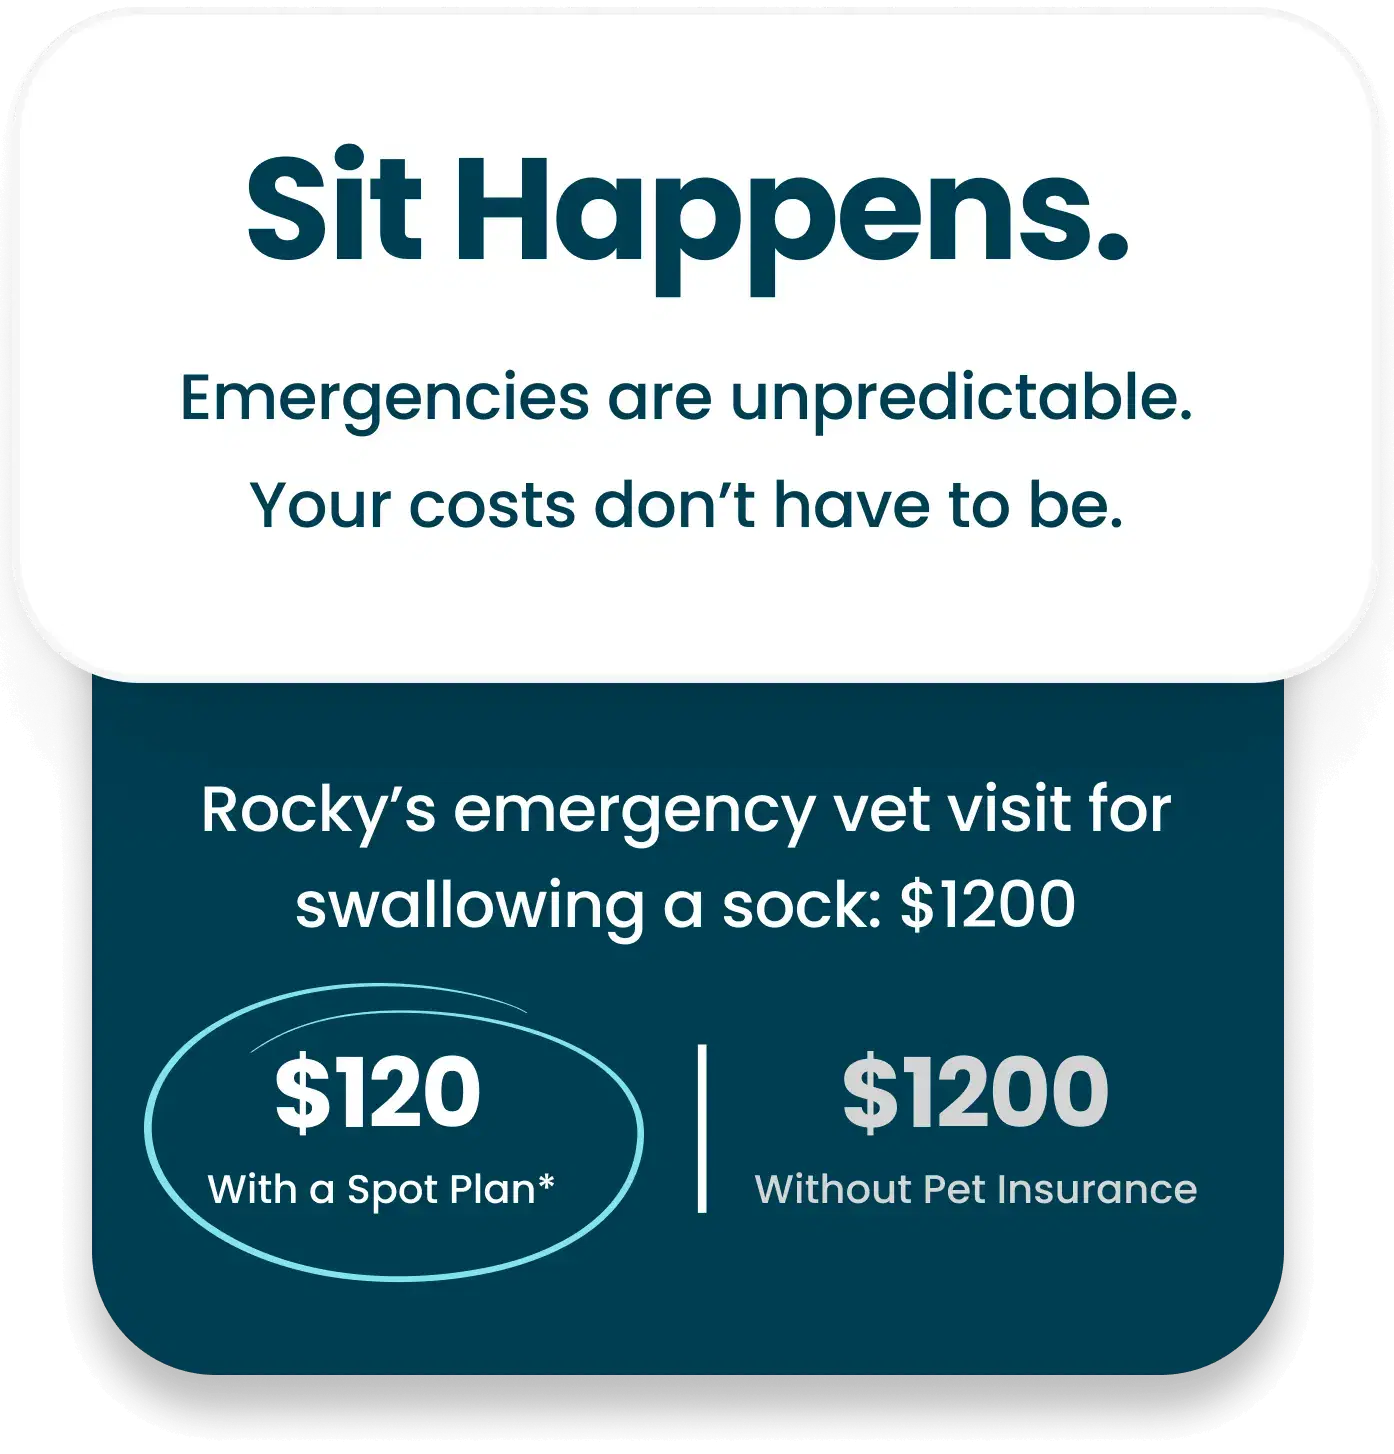 Sit happens. Emergencies are unpredictable. Your costs don't have to be. Rocky's emergency vet visit for swallowing a sock: $1200. You pay $120 with a Spot plan. You pay $1200 without pet insurance. 